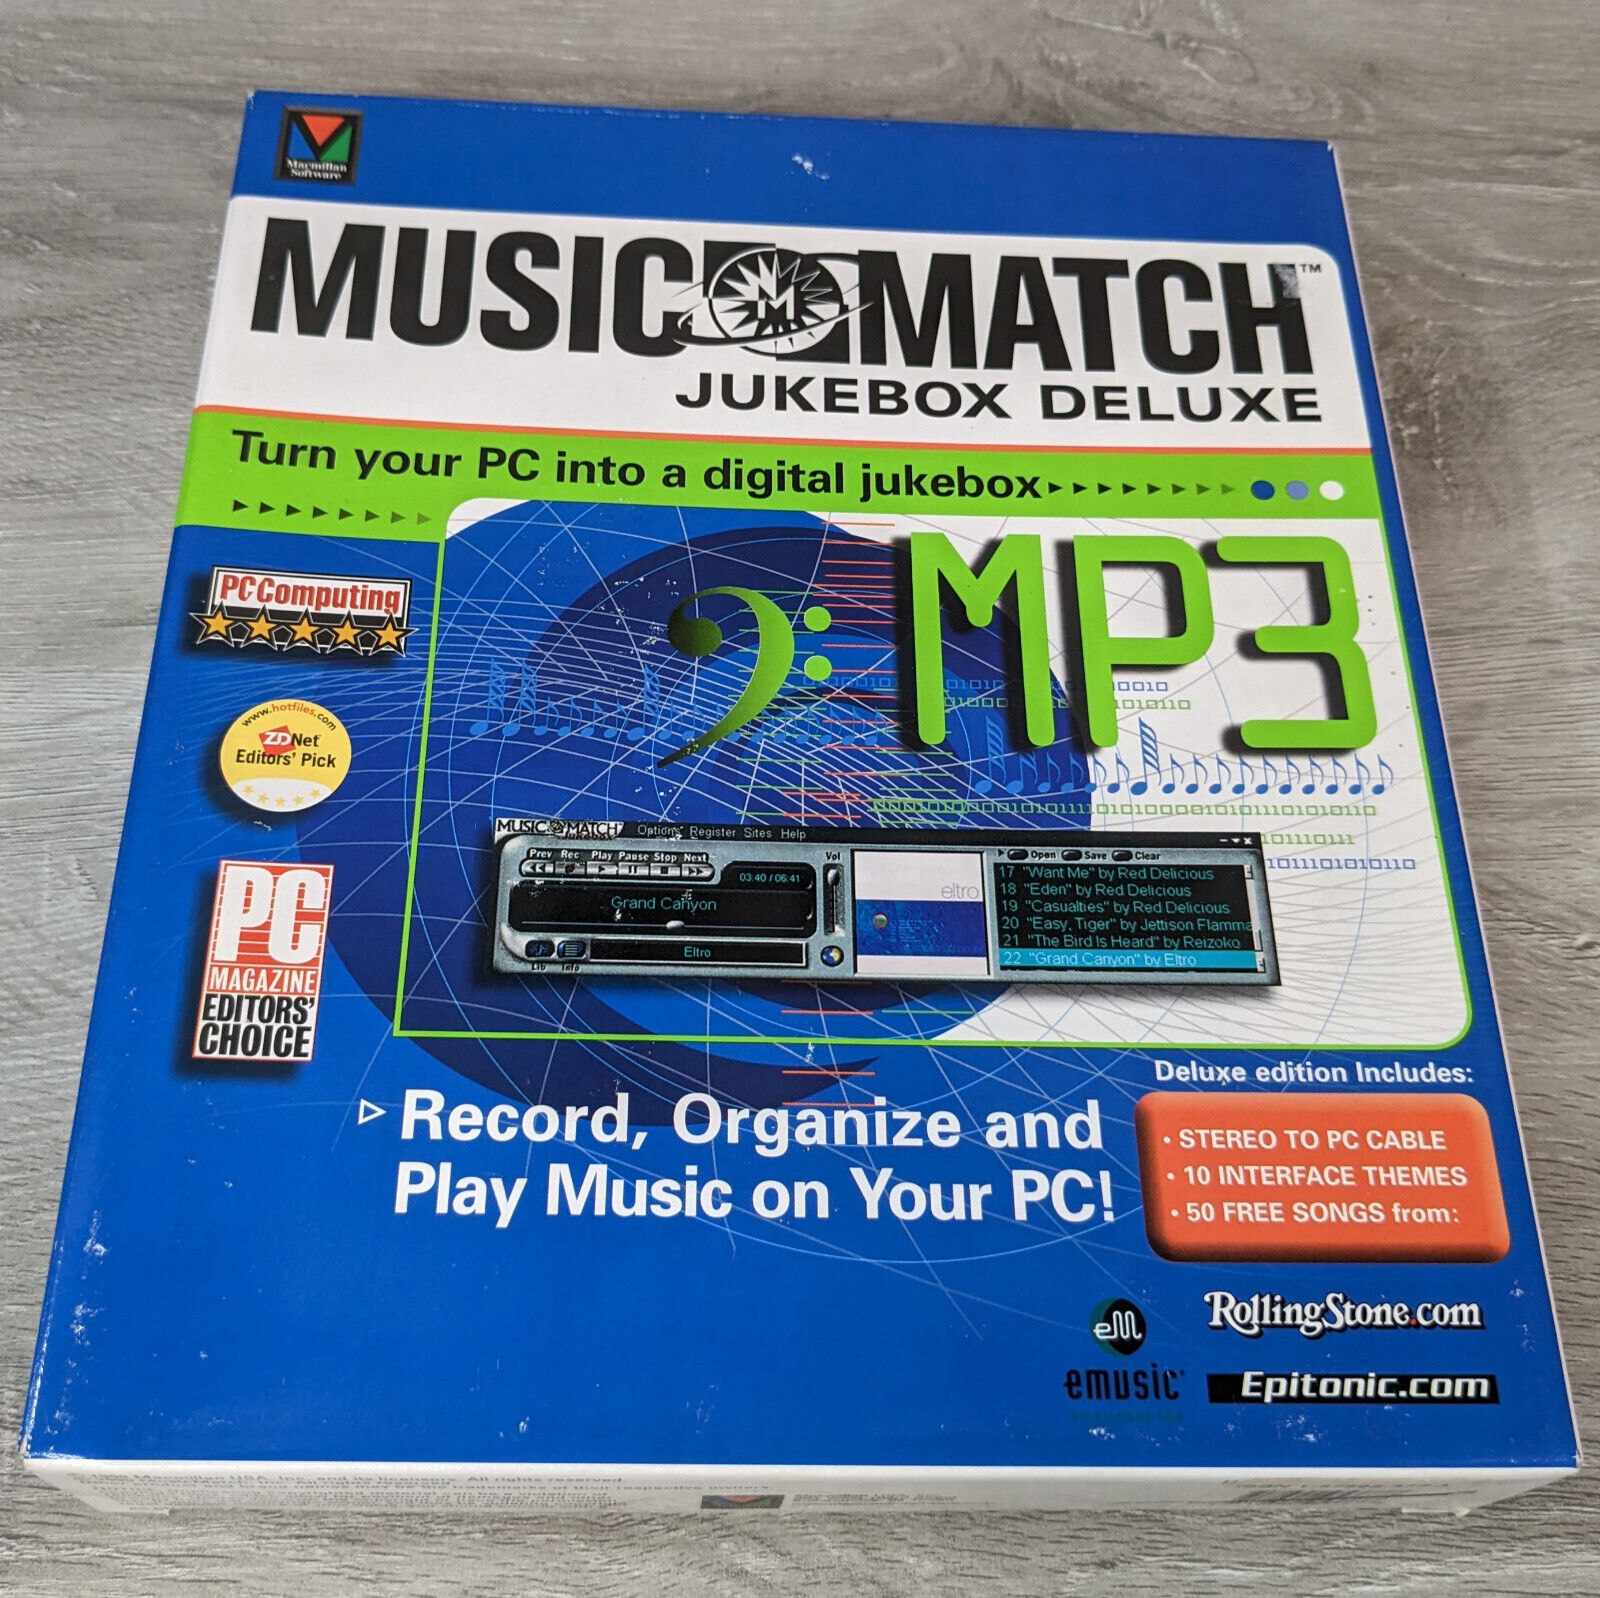 Music Match Jukebox Deluxe MP3 Sofware (1999) - New and Sealed Retail Long Box